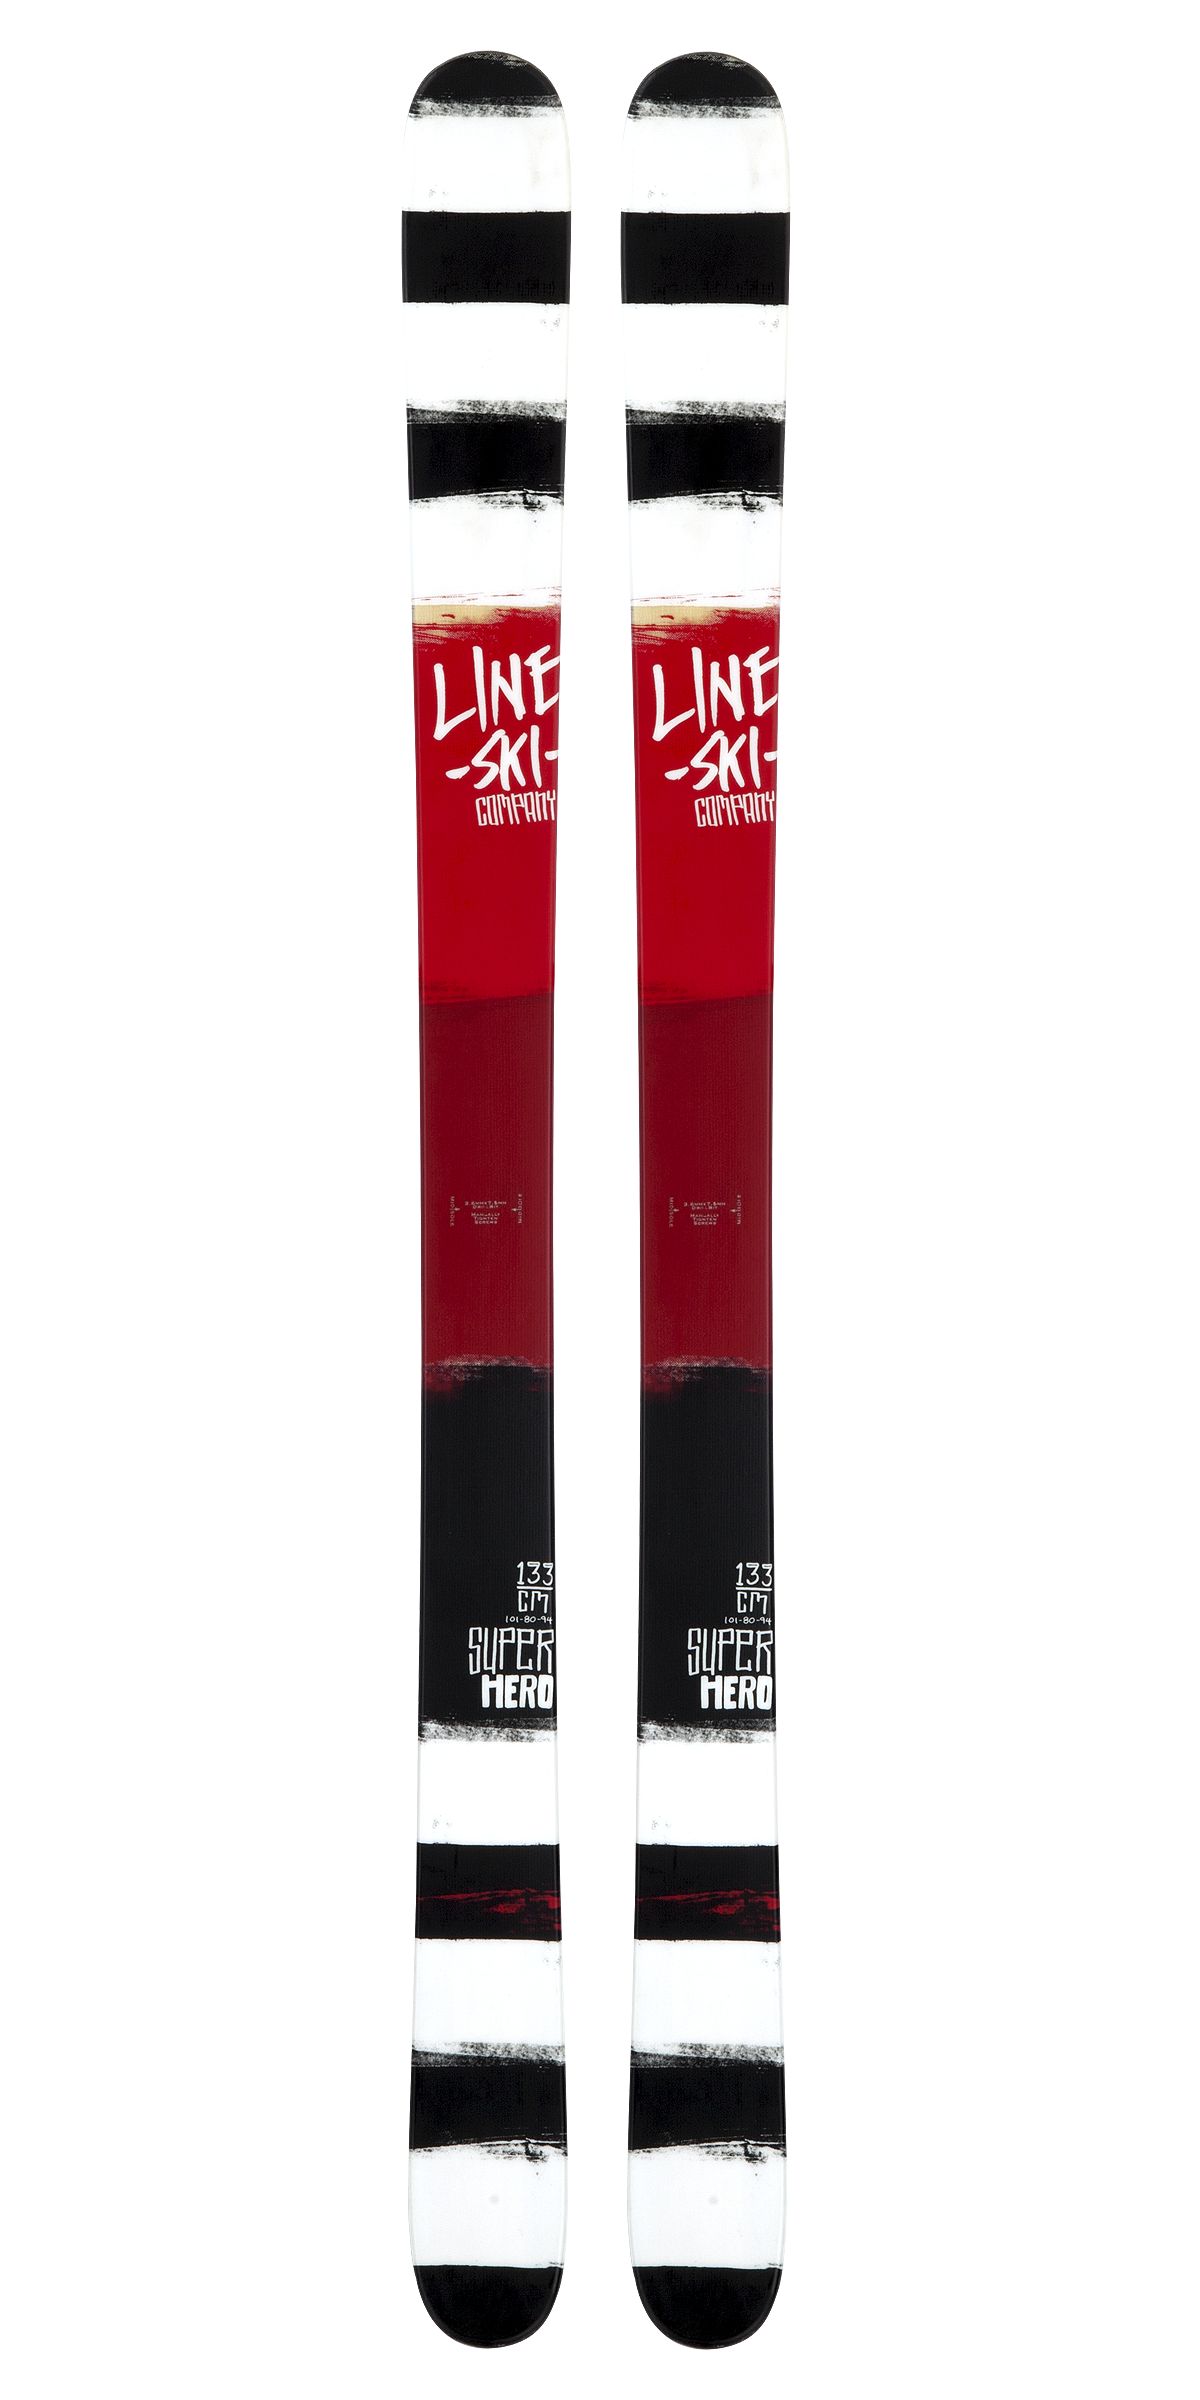 2014 Line Skis Available In-Store NOW! - aussieskier.com blog - Online ...